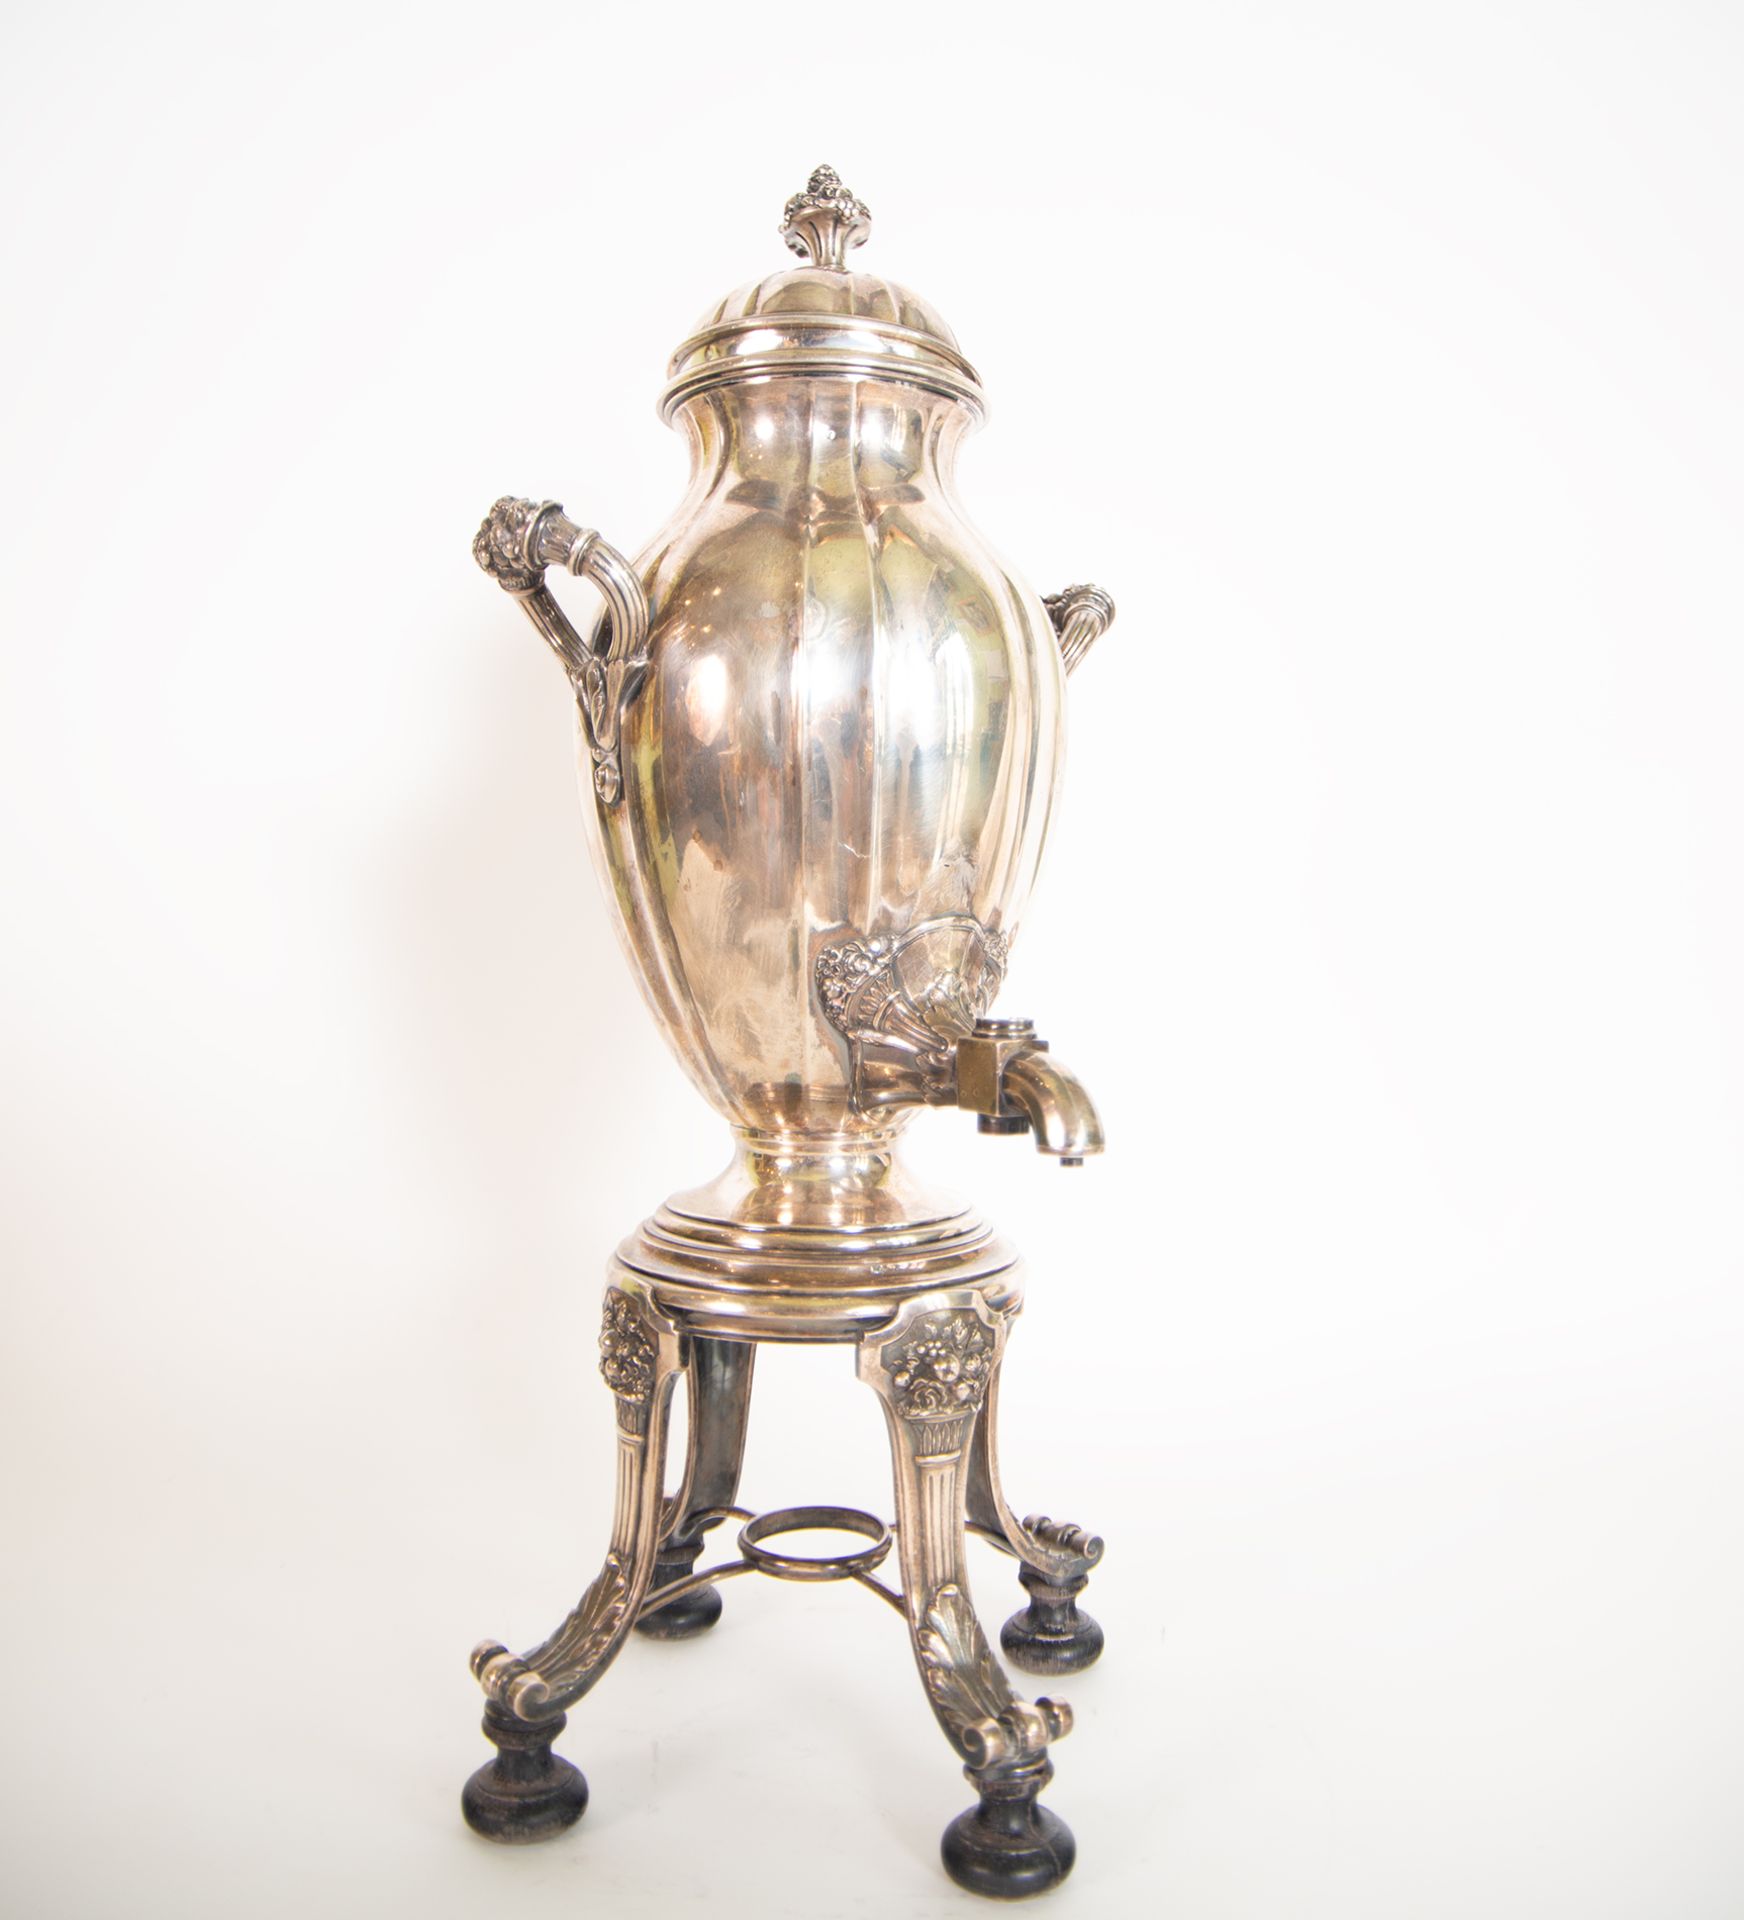 19th century French Silver Samovar, 19th century French school - Image 2 of 5